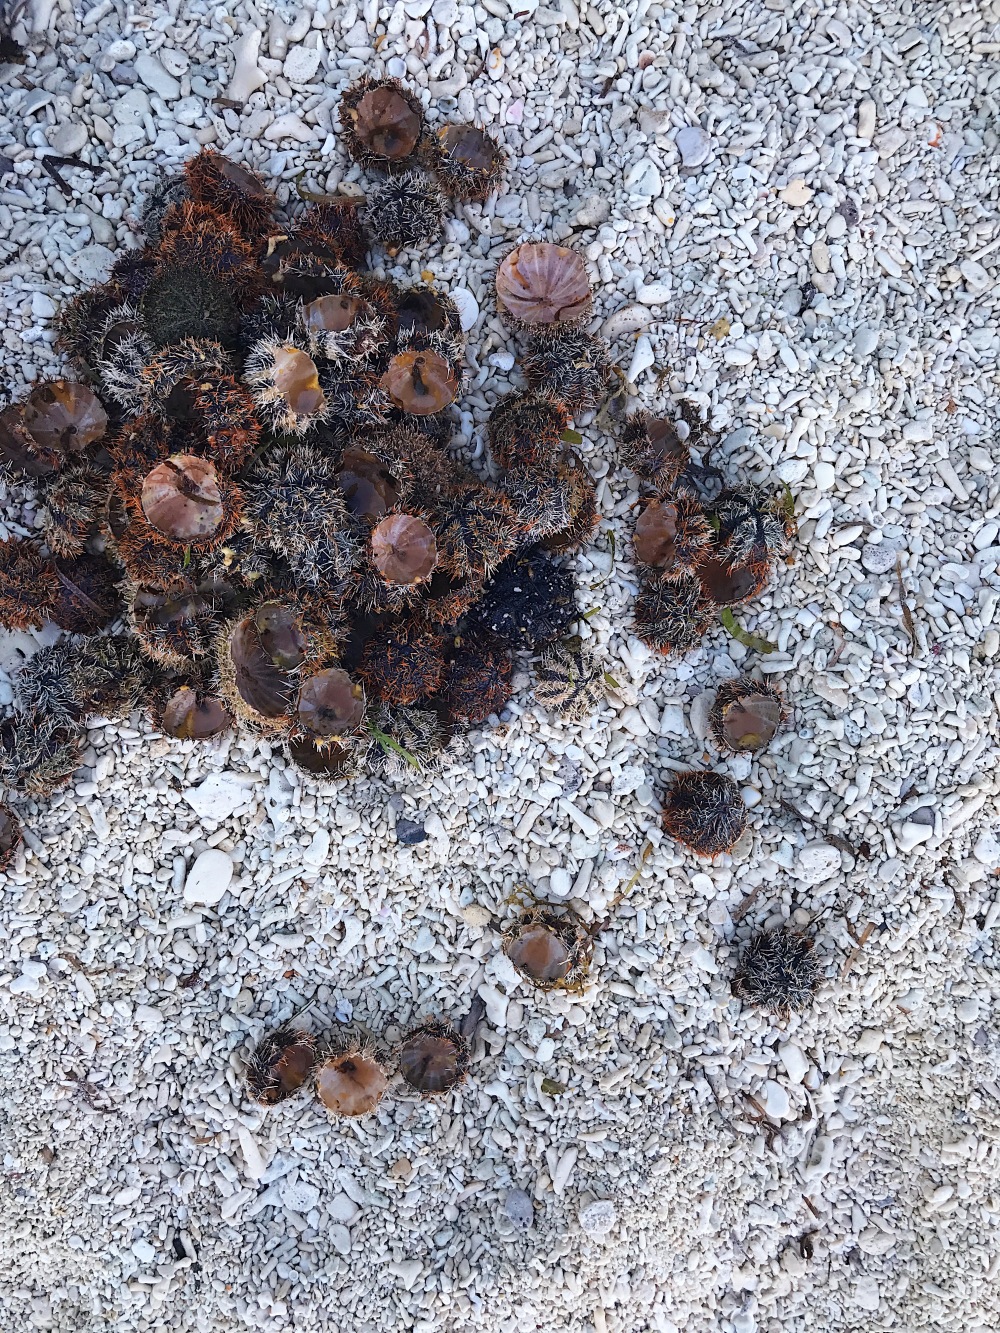 These are the remnants of the sea urchins after the Siquijidnons took out their flesh.